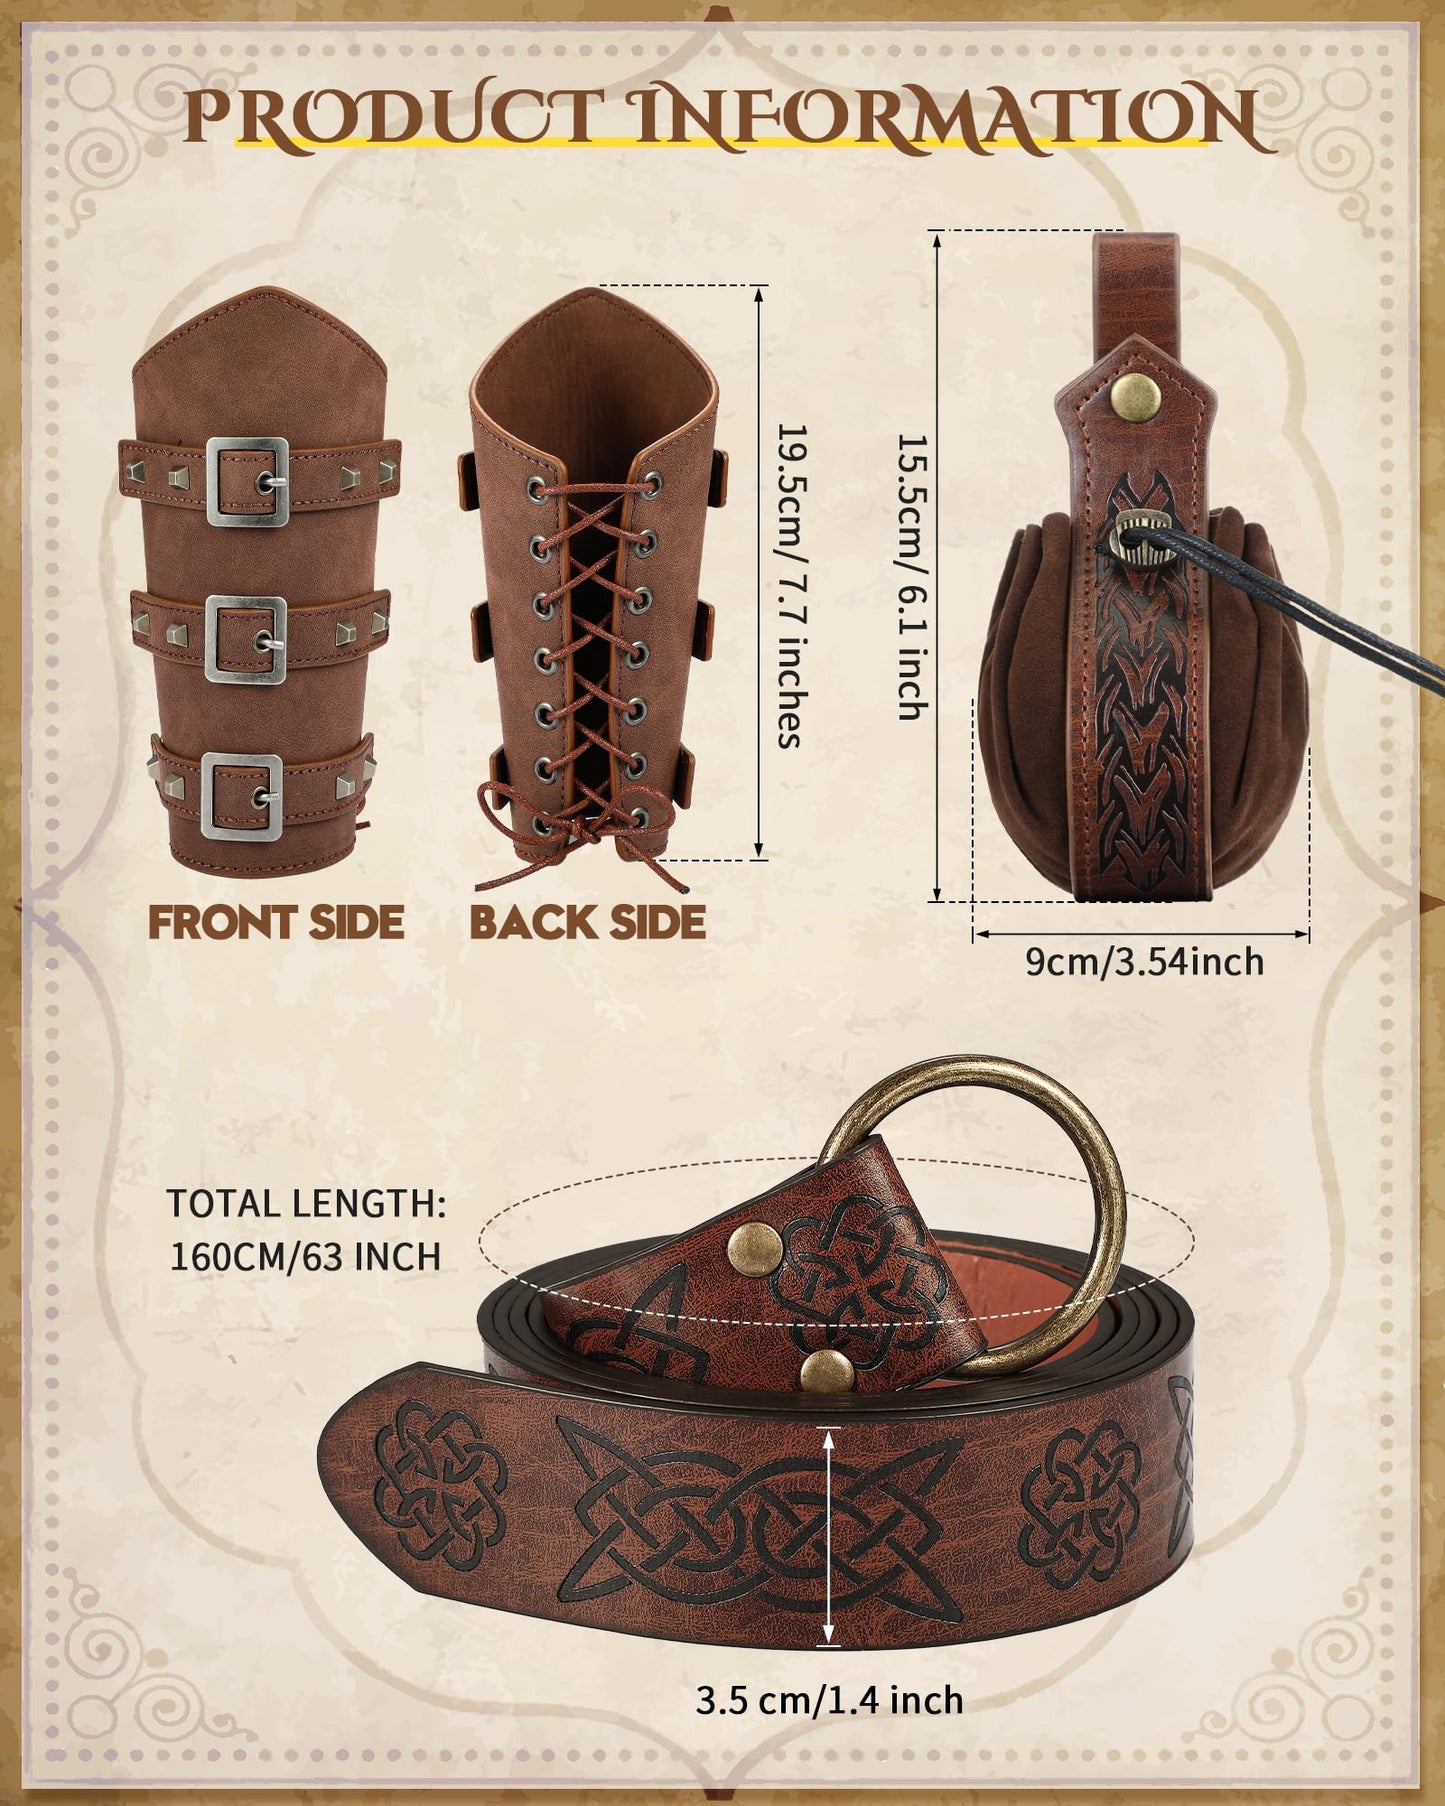 LEIFIDE Medieval Viking Belt Leather Belt Pouch Faux Leather Arm Guards Renaissance Accessories Viking Costume Leather Bracers Medieval Bag Knight Belt for Halloween Fair Cosplay Black Classic